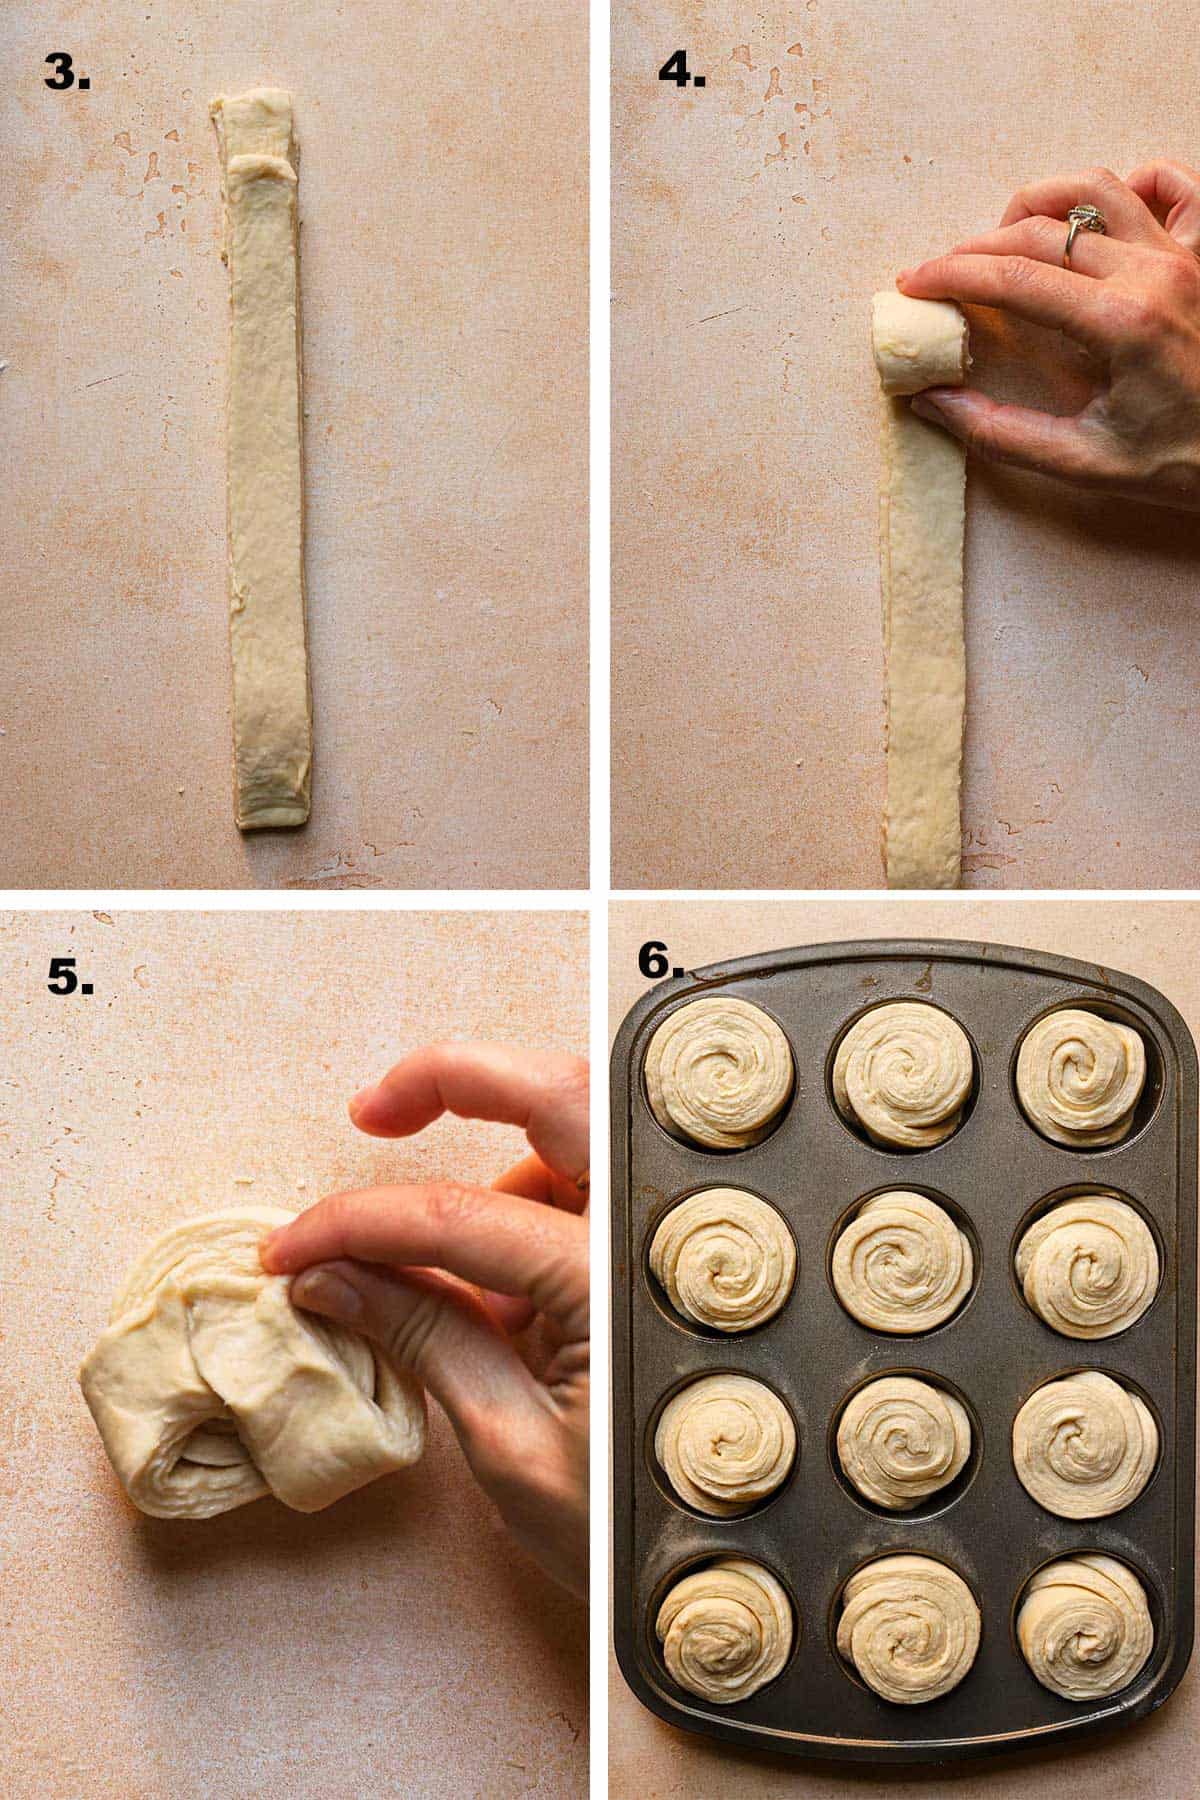 how to shape muffins using croissant dough